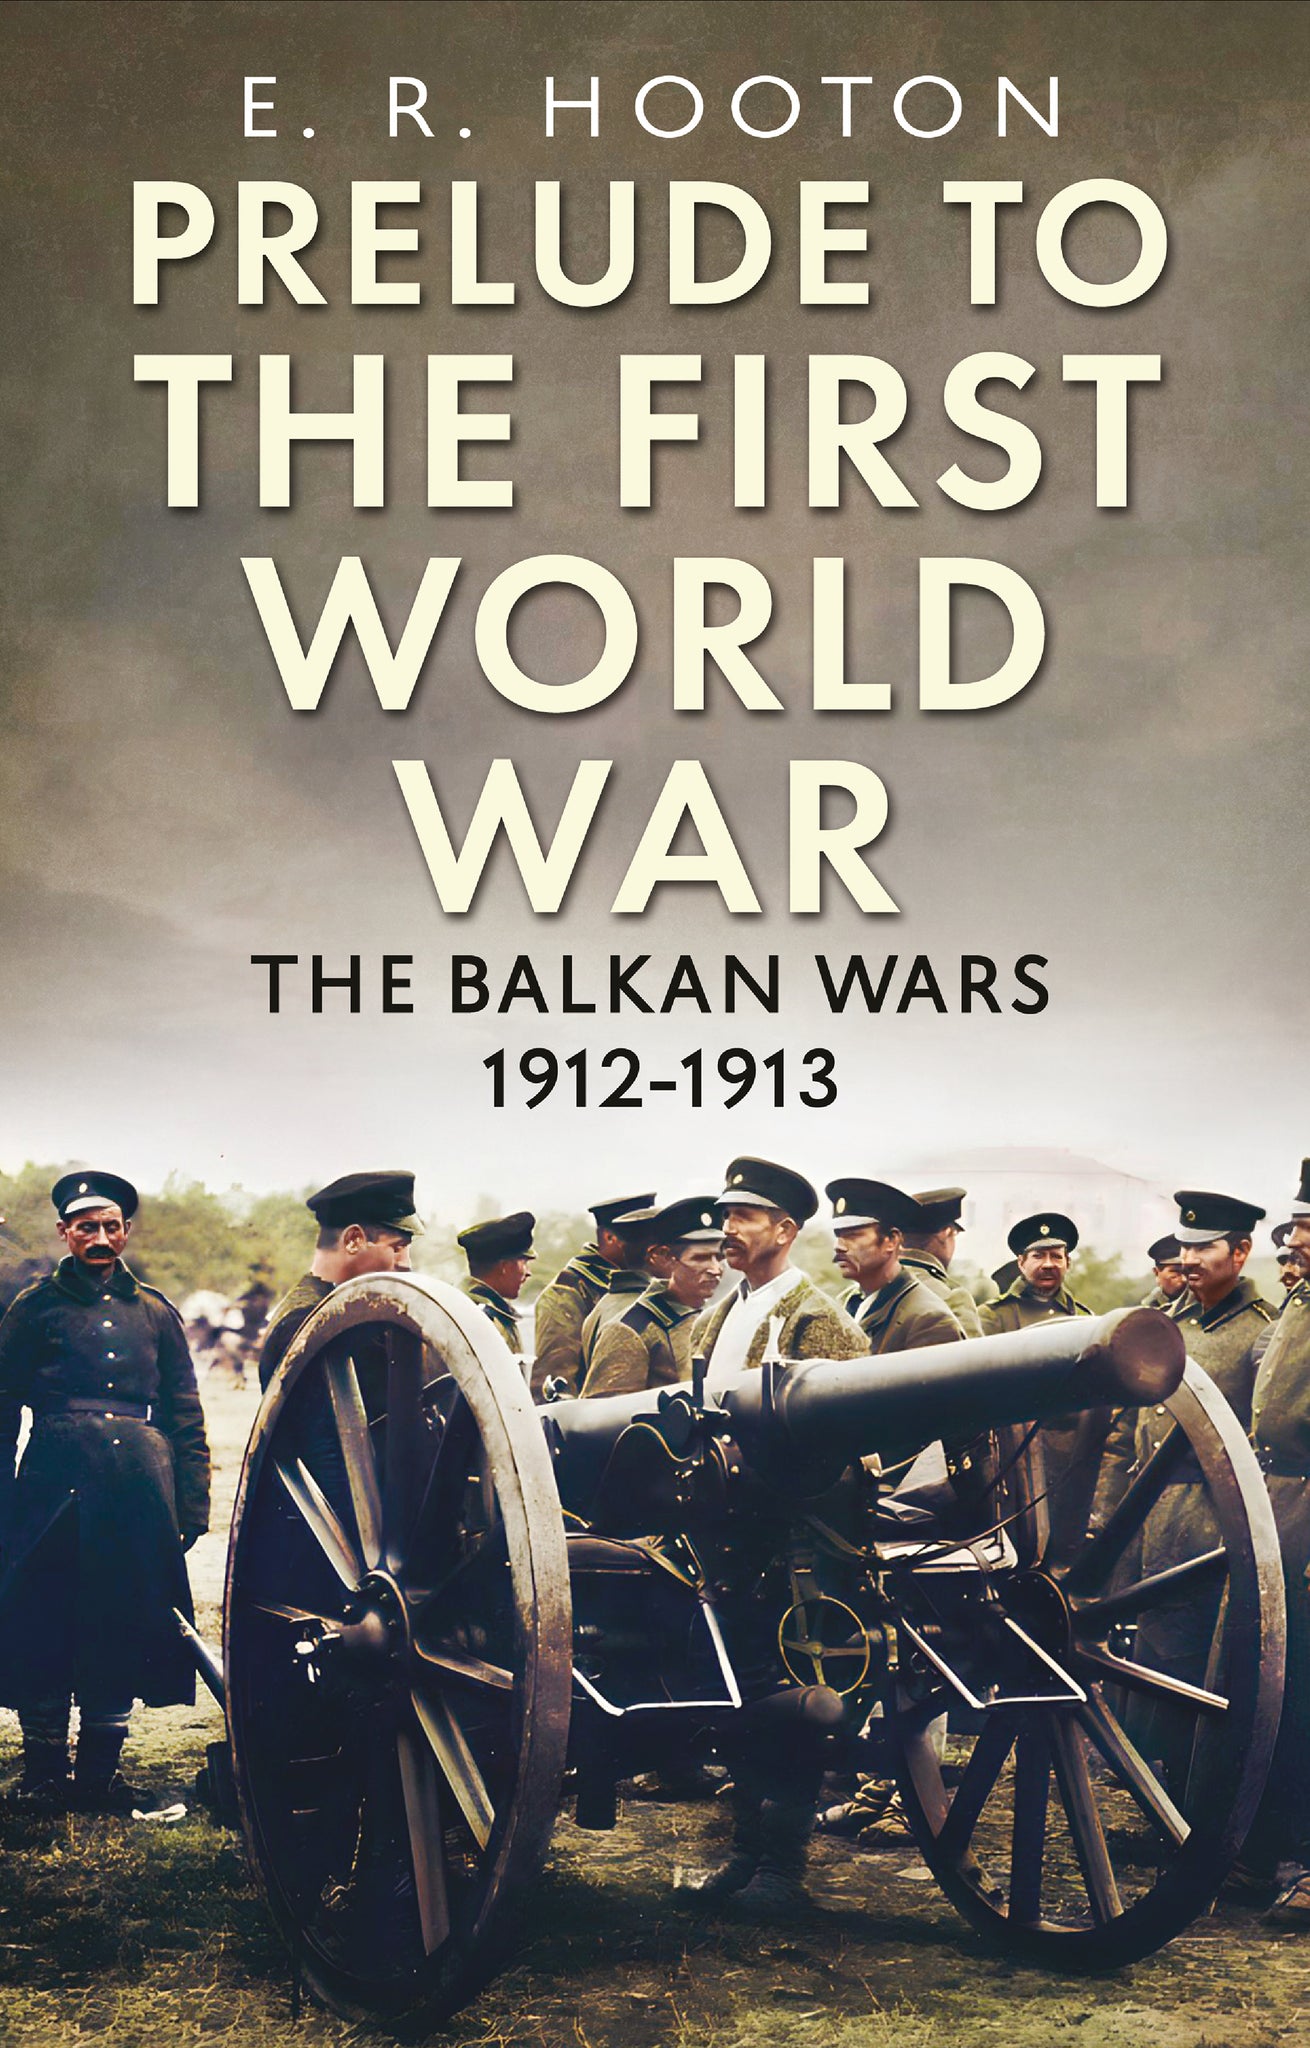 Prelude to the First World War: The Balkan Wars 1912-1913